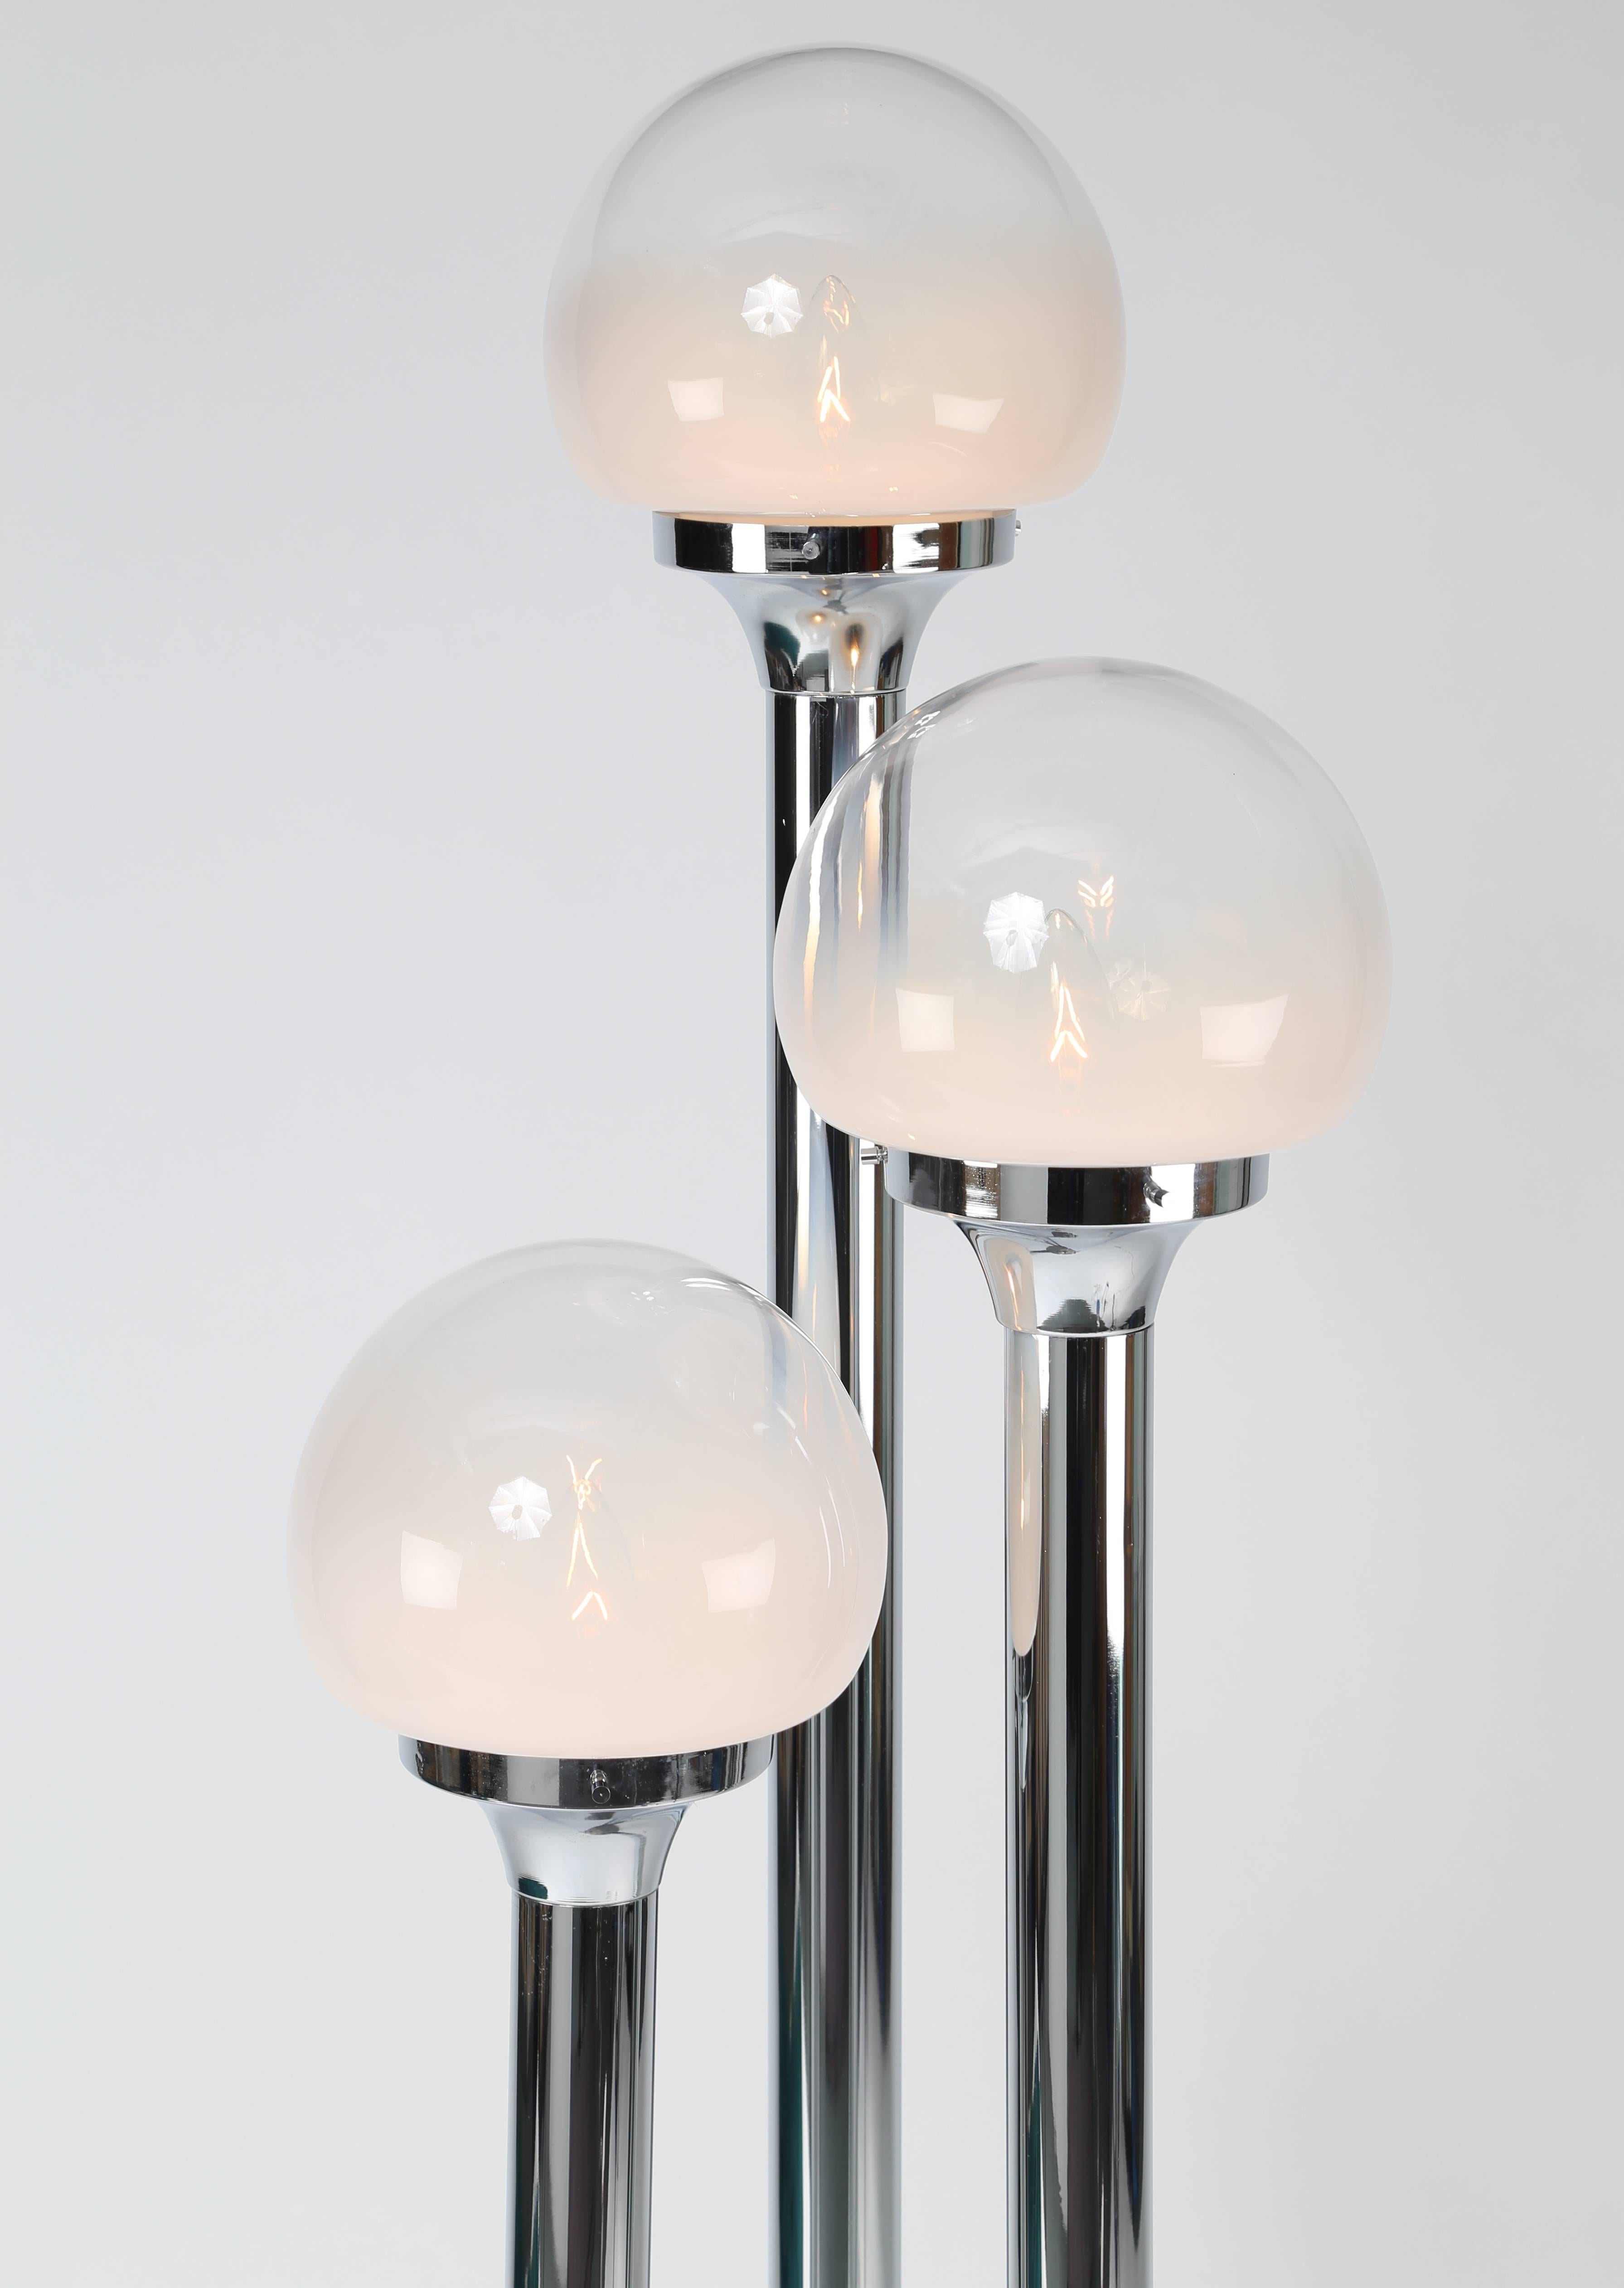 Polished-chrome floor lamp with three tubular supports, each holding a Murano-glass globe that is solid white at base graduating to clear at the top, circa 1970s. Overall dimensions including globes 11.5